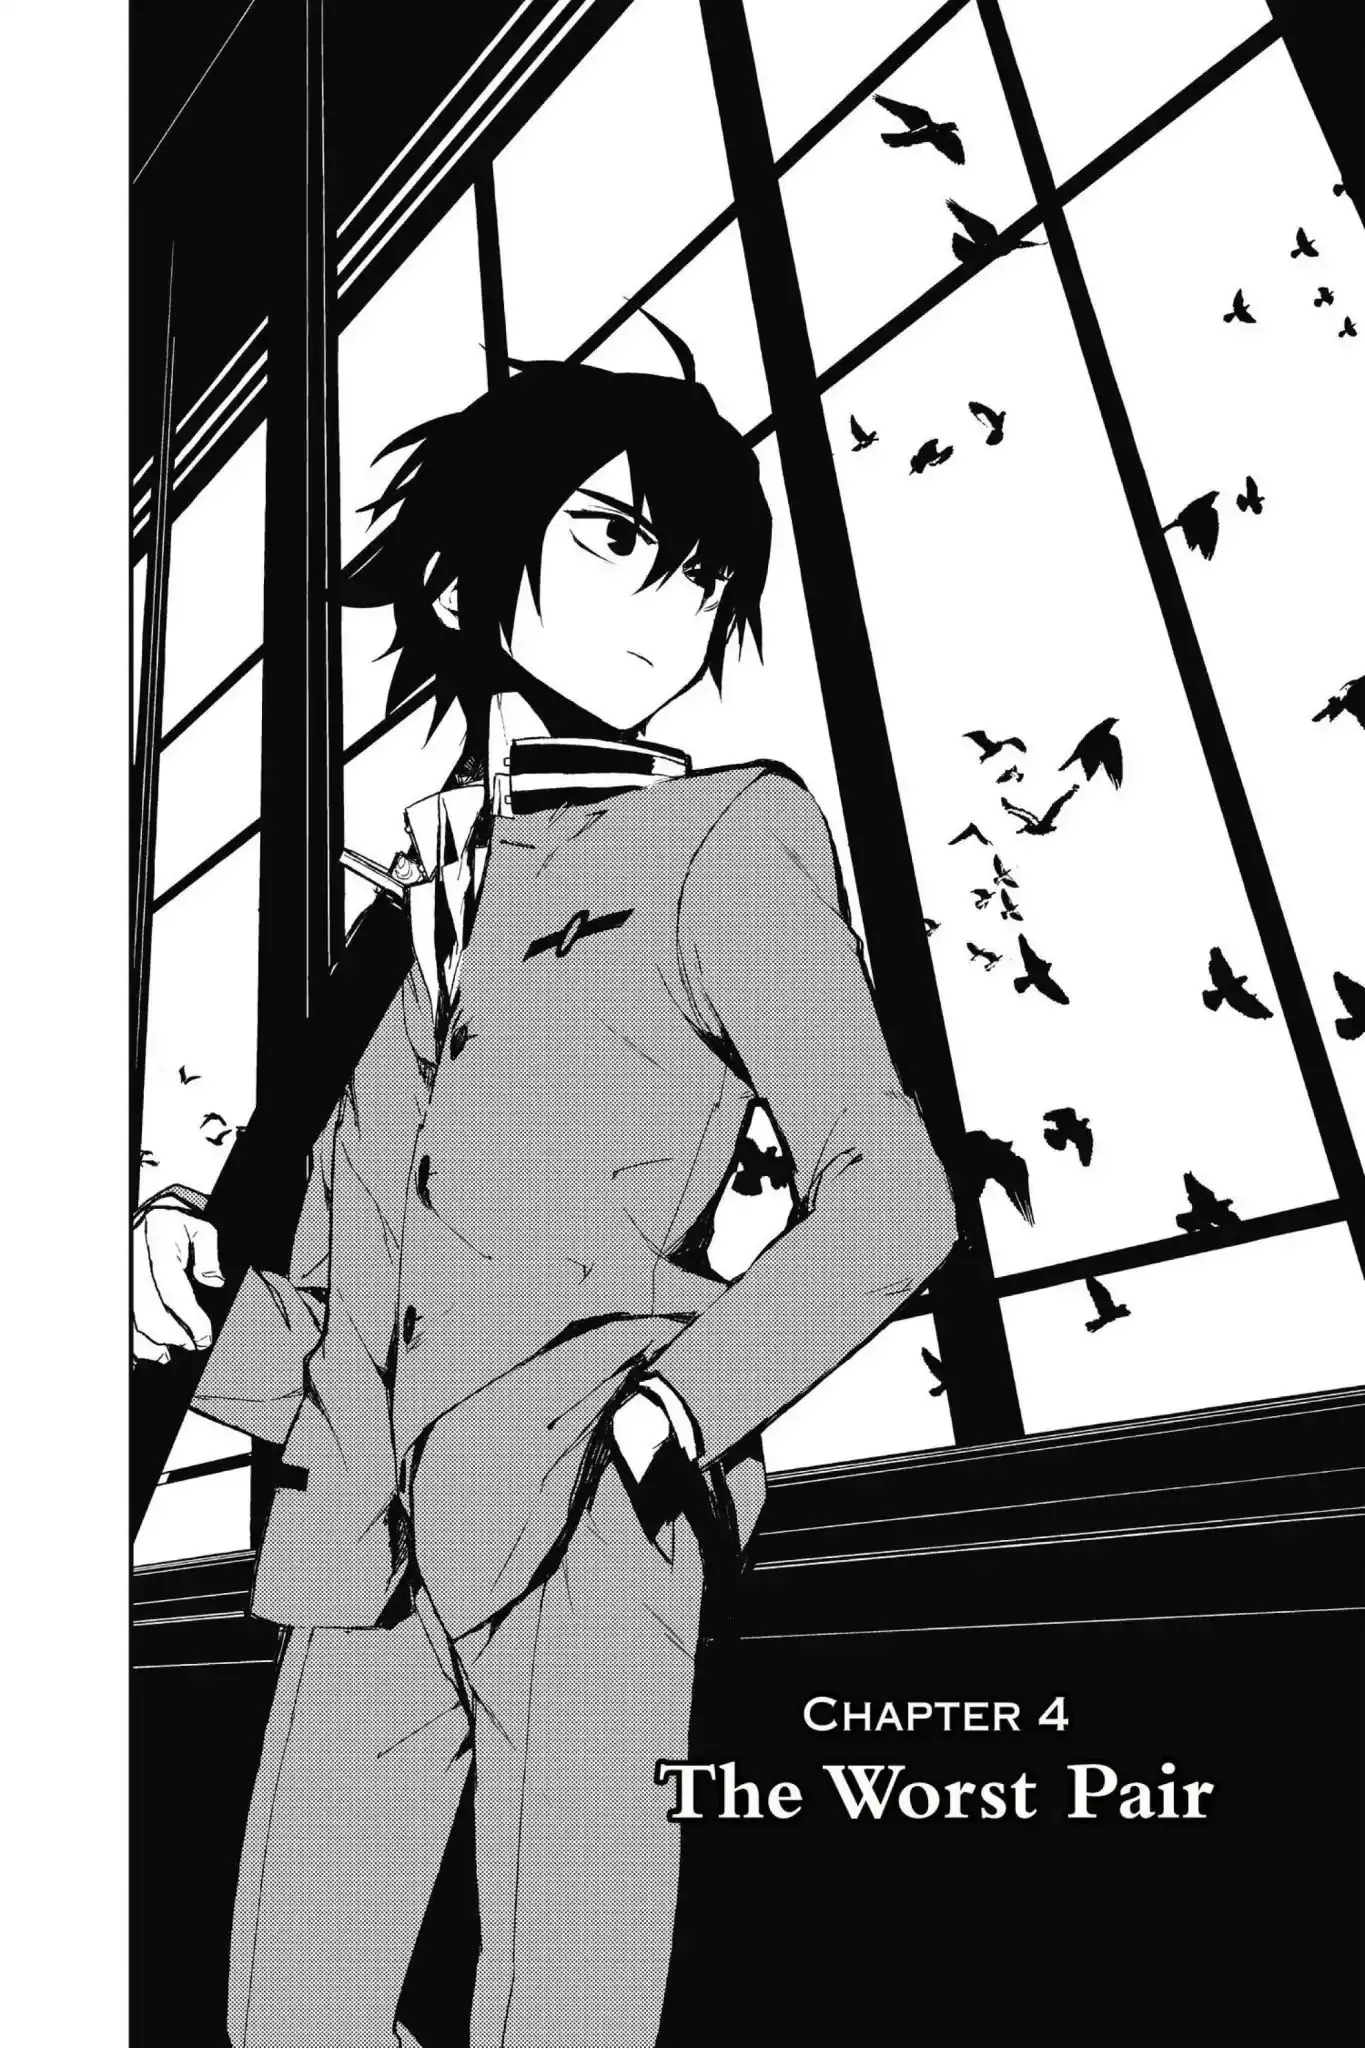 Seraph Of The End - 4 page 9-5dee020c